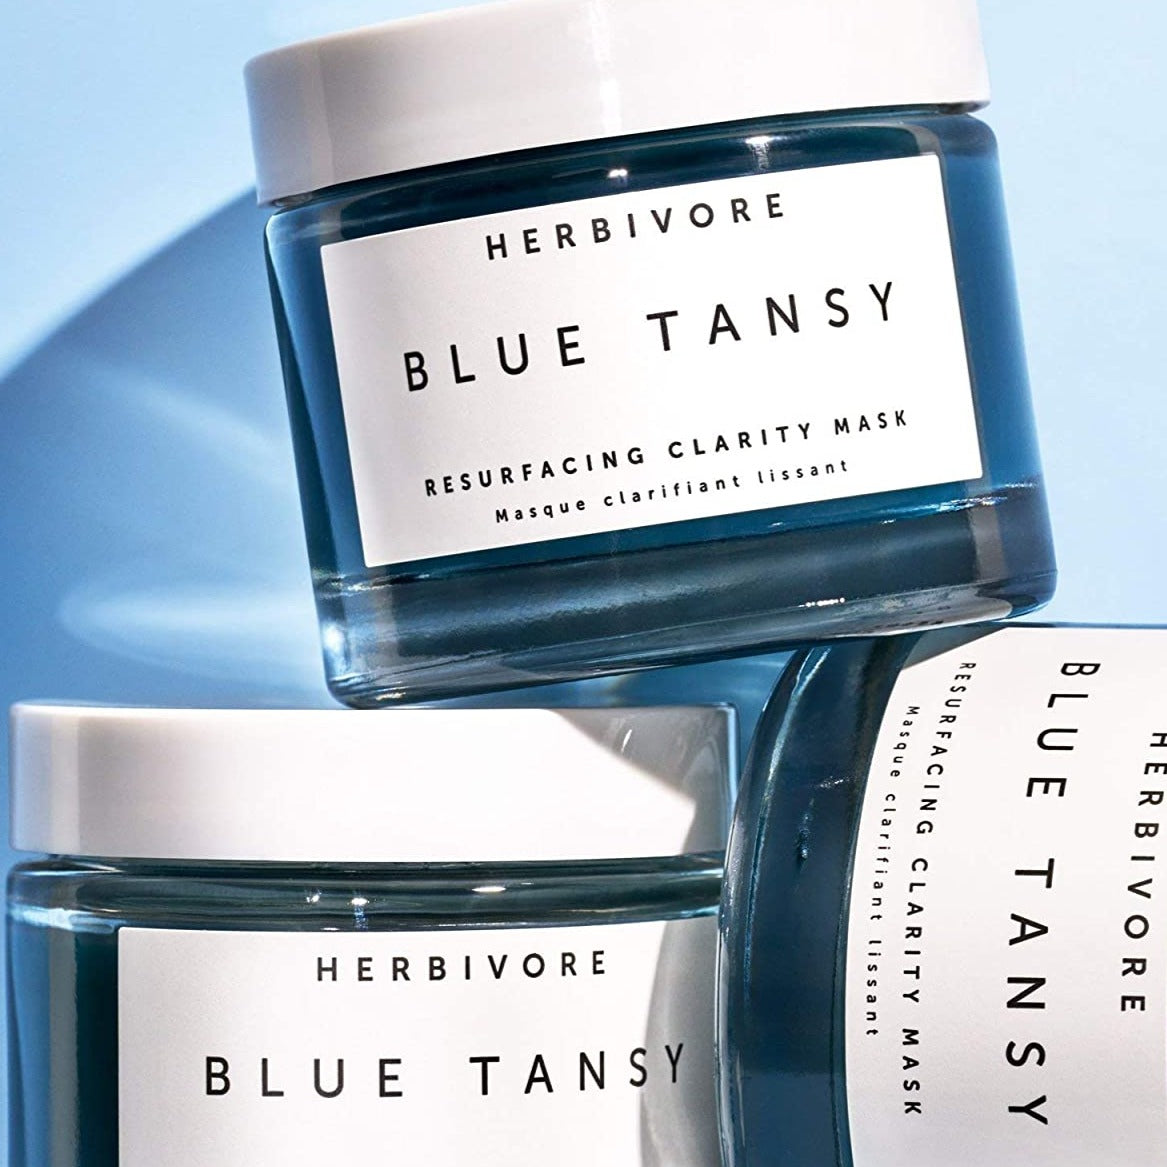 Blue Tansy Oil: A Natural Source Of Azulene Which In Addition To Giving The Oil Its Beautiful Blue Color, Helps Soothe The Appearance Of Redness + Irritation Herbivore Products Are Truly Natural, Vegan + Cruelty-Free.